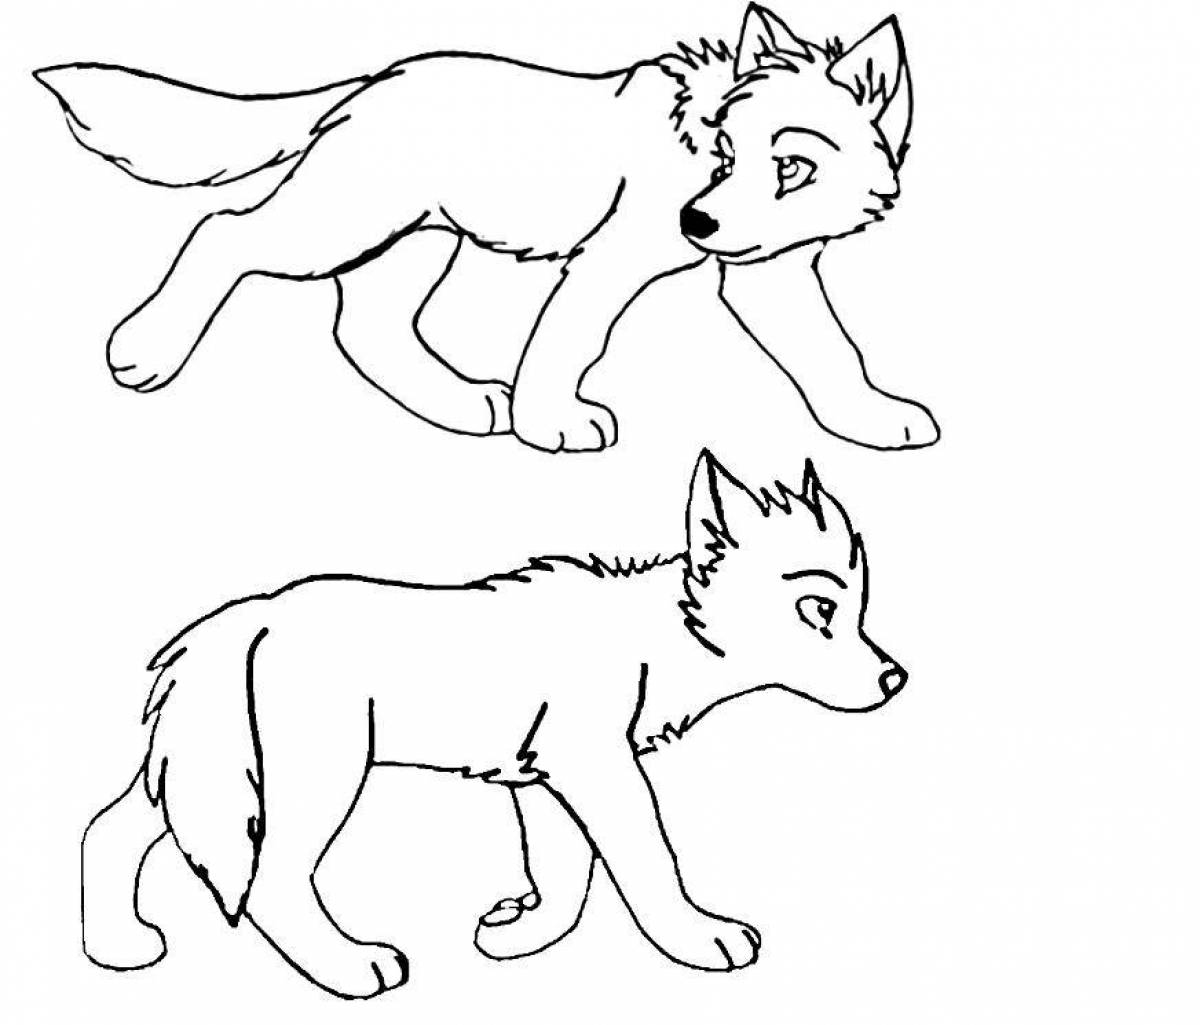 Amazing wolf coloring book